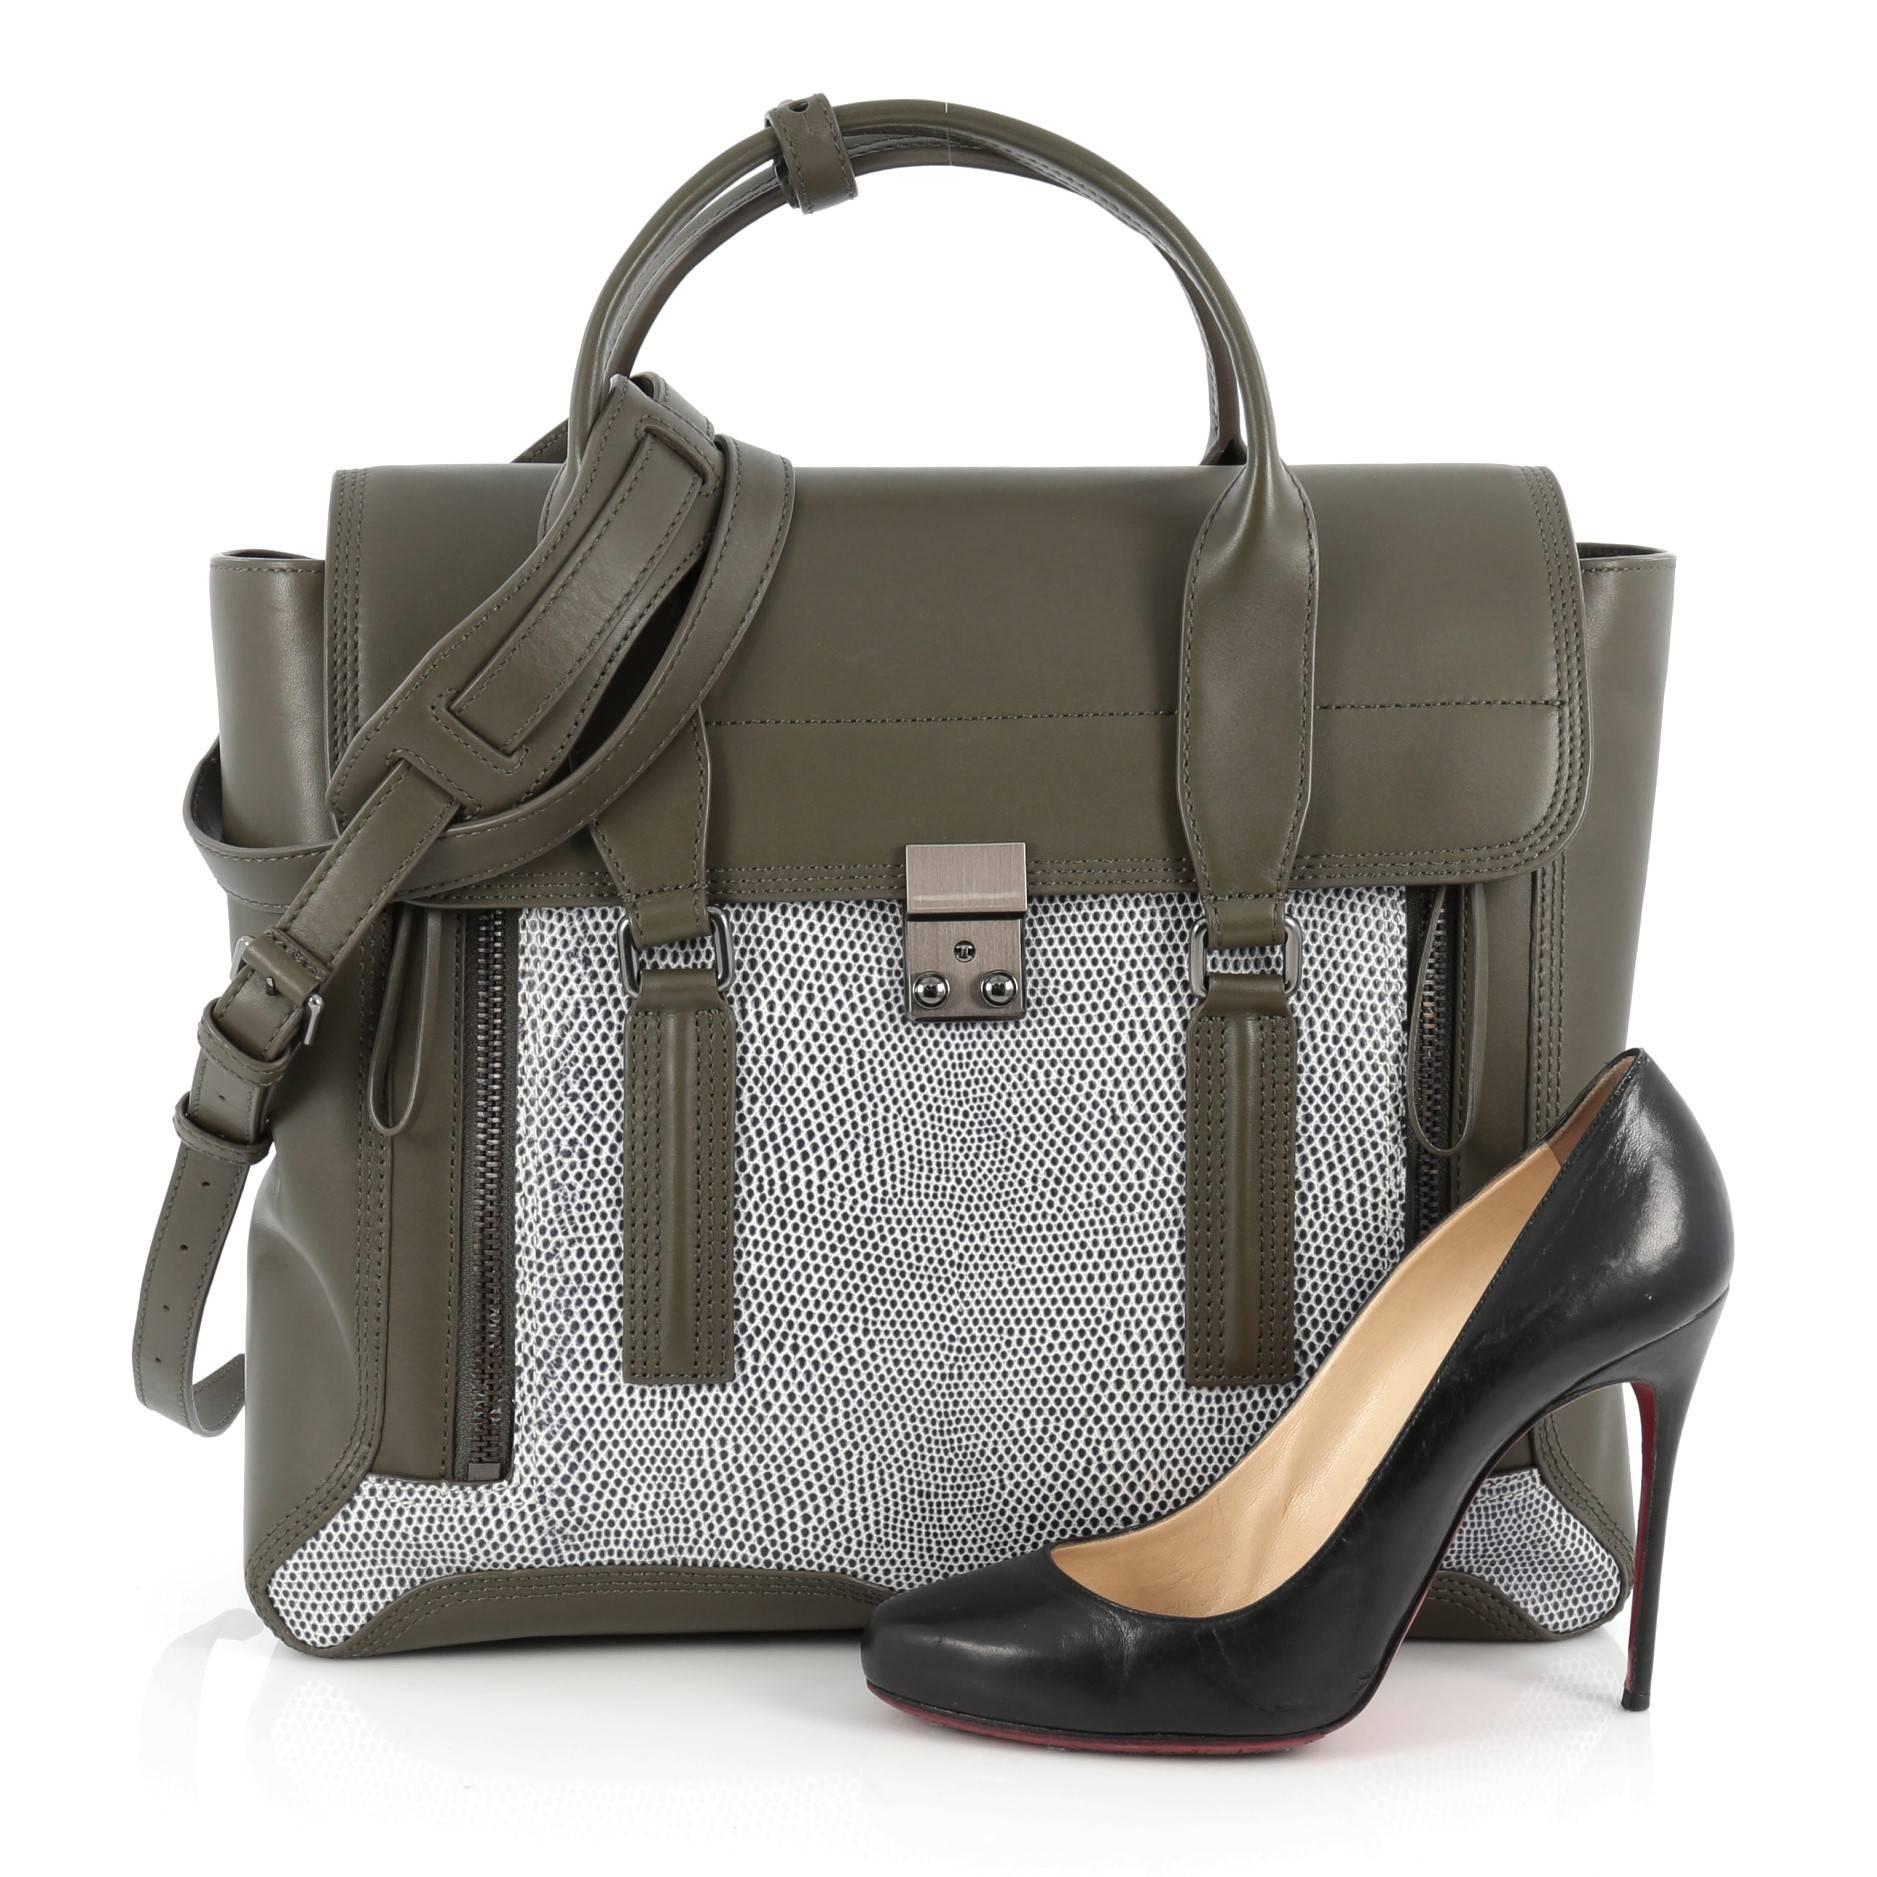 This authentic 3.1 Phillip Lim Pashli Satchel Lizard Embossed and Leather Large is a practical bag with a stylish edge made for on-the-go moments. Crafted from khaki green and blue and white lizard embossed leather, this chic satchel features dual